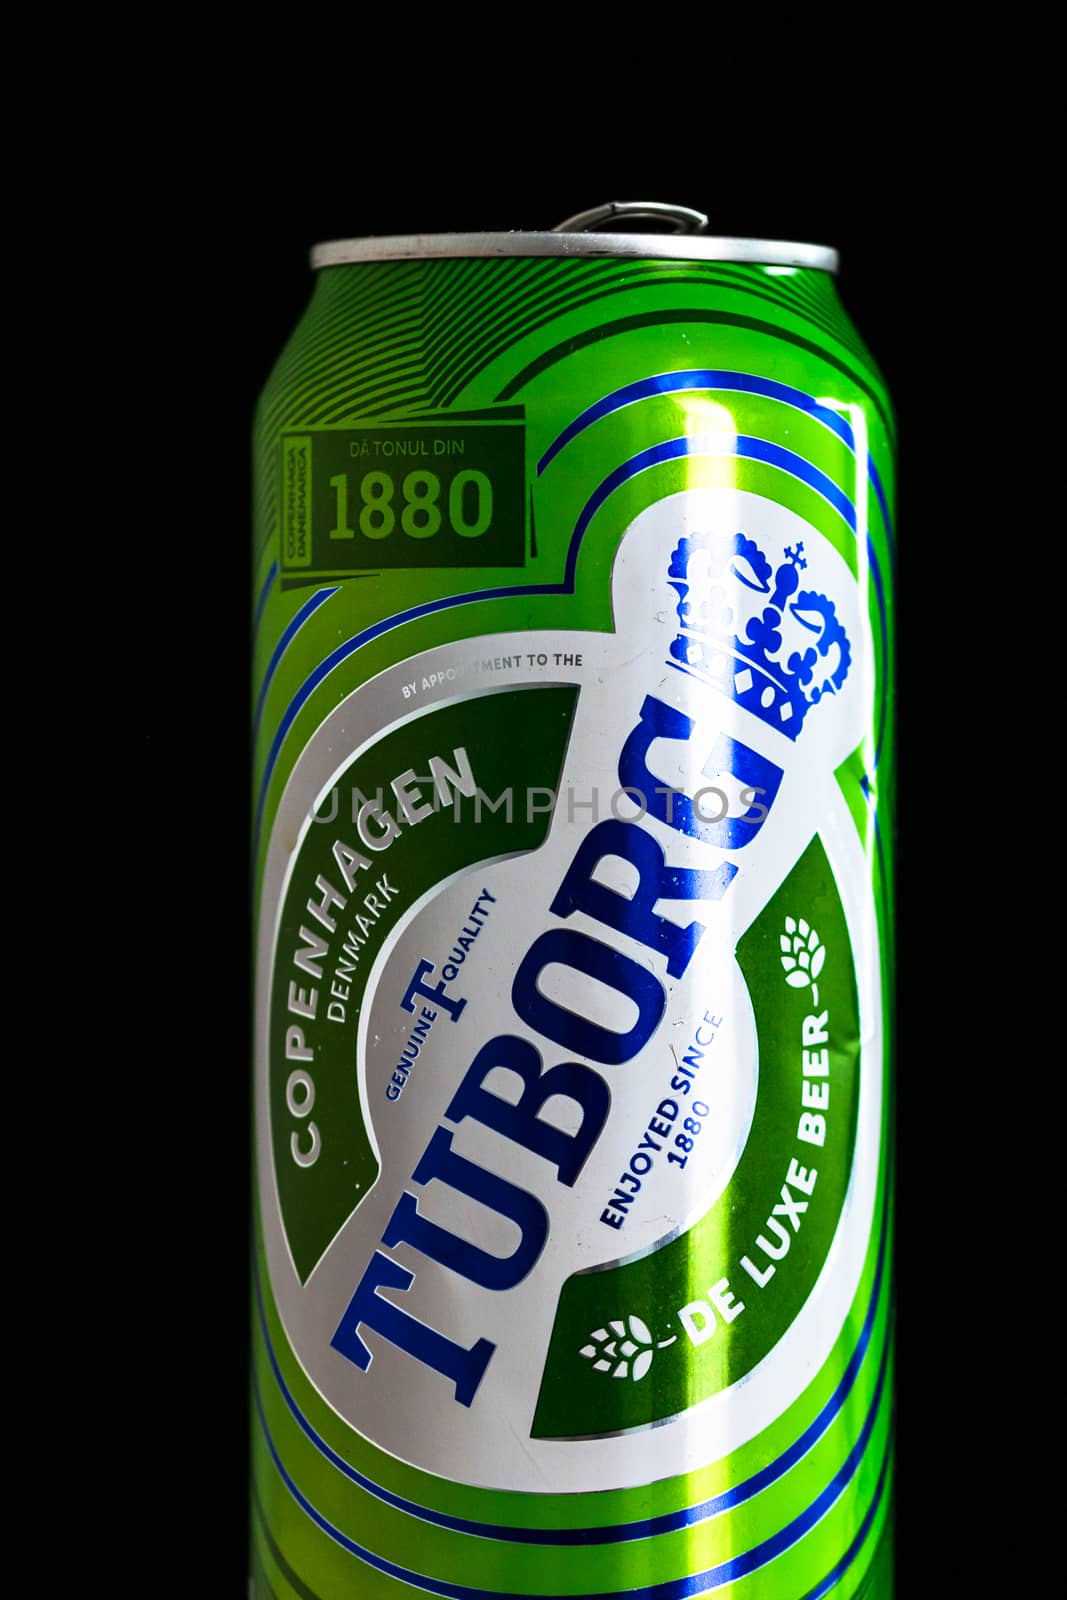 Tuborg Danish beer in a tin aluminum can. Detail photo of beer can in Bucharest, Romania, 2020